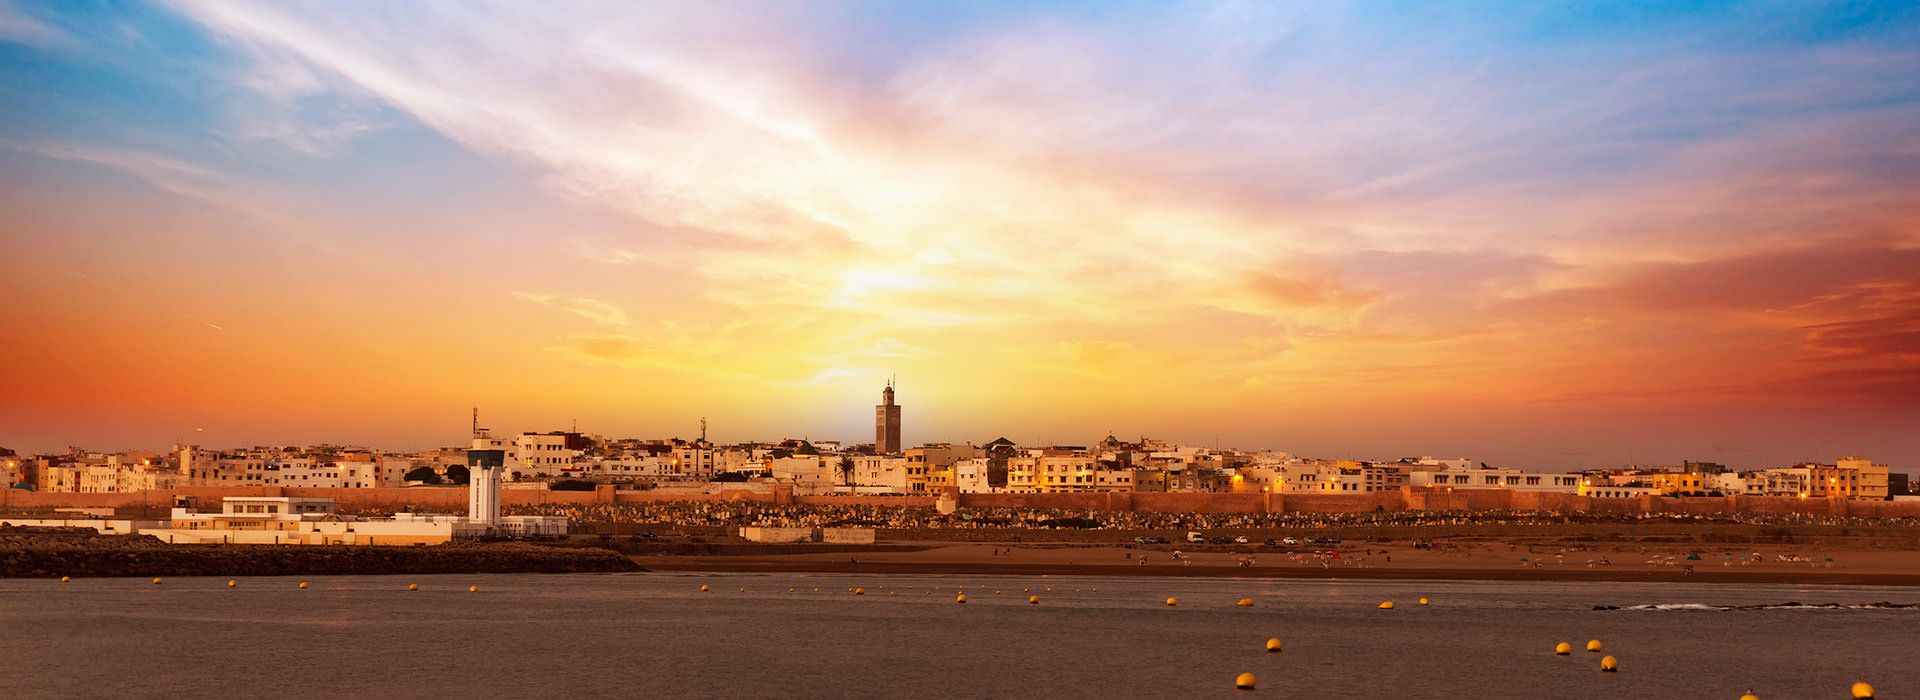 Morocco Travel Guide - Travel Insights and Tips